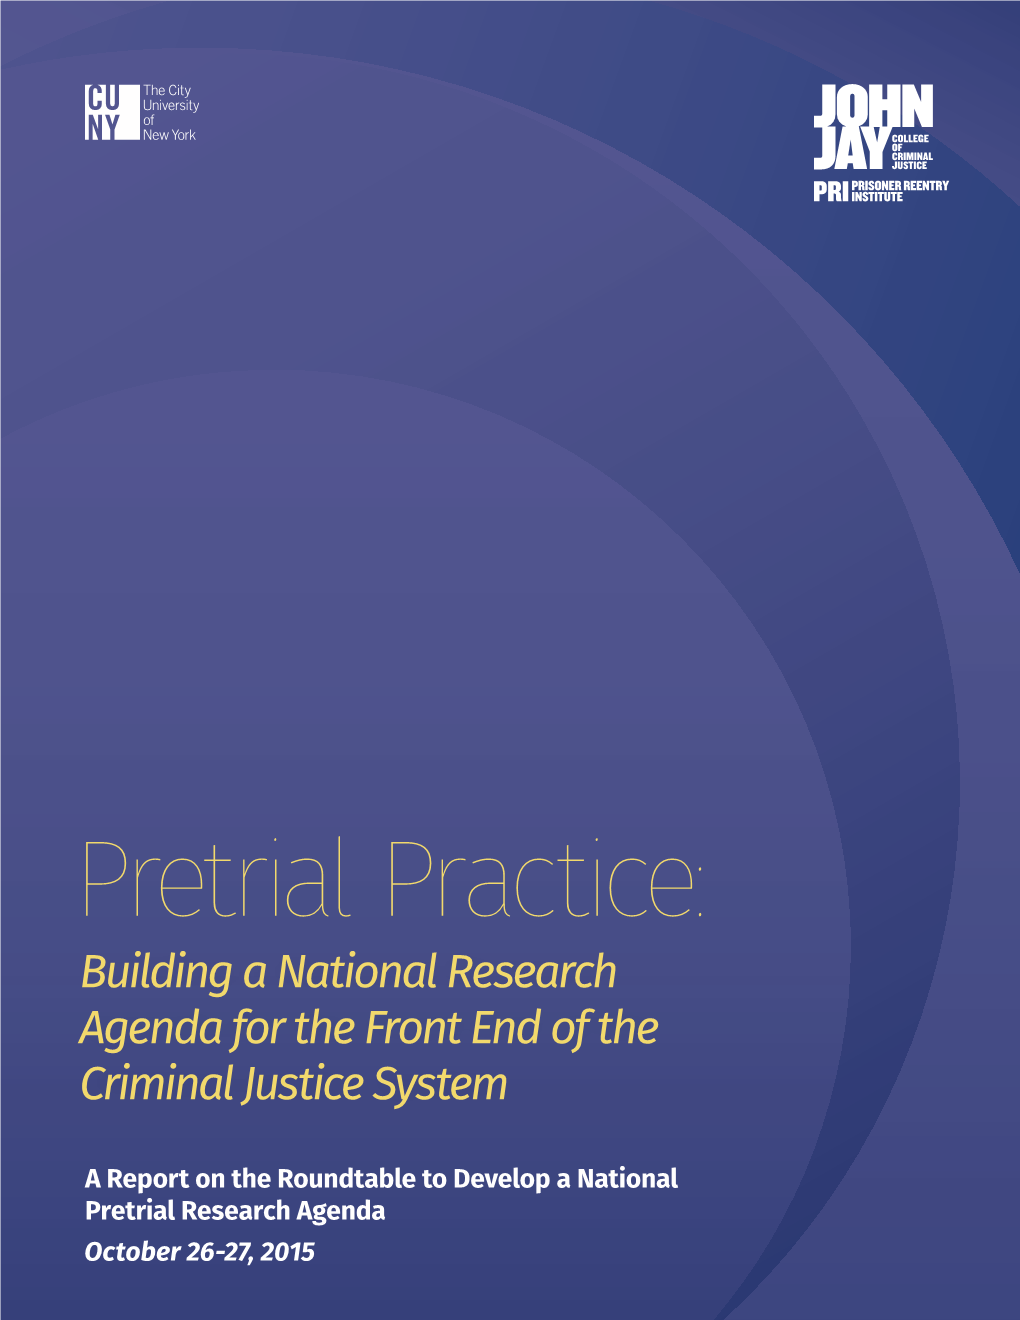 Pretrial Practice: Building a National Research Agenda for the Front End of the Criminal Justice System